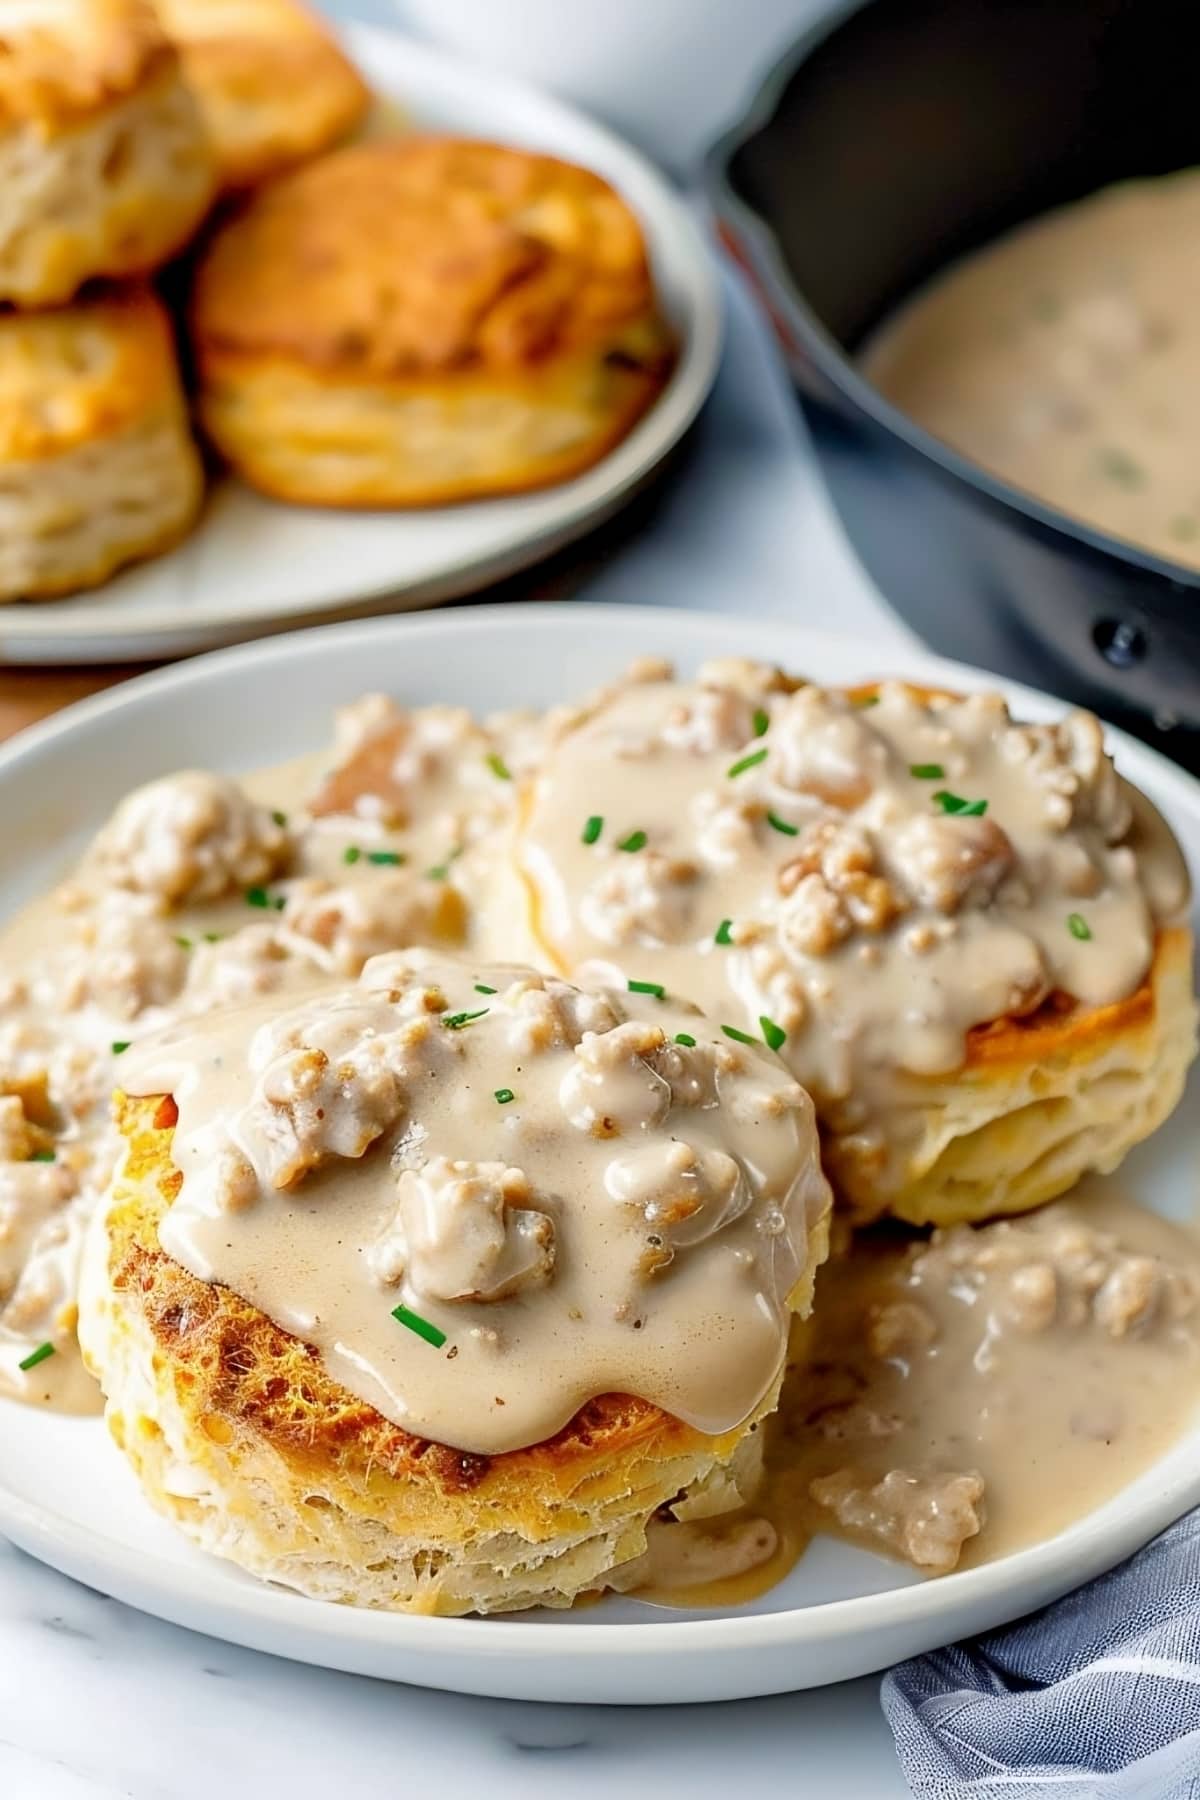 Delicious homemade biscuits and gravy in a white plate